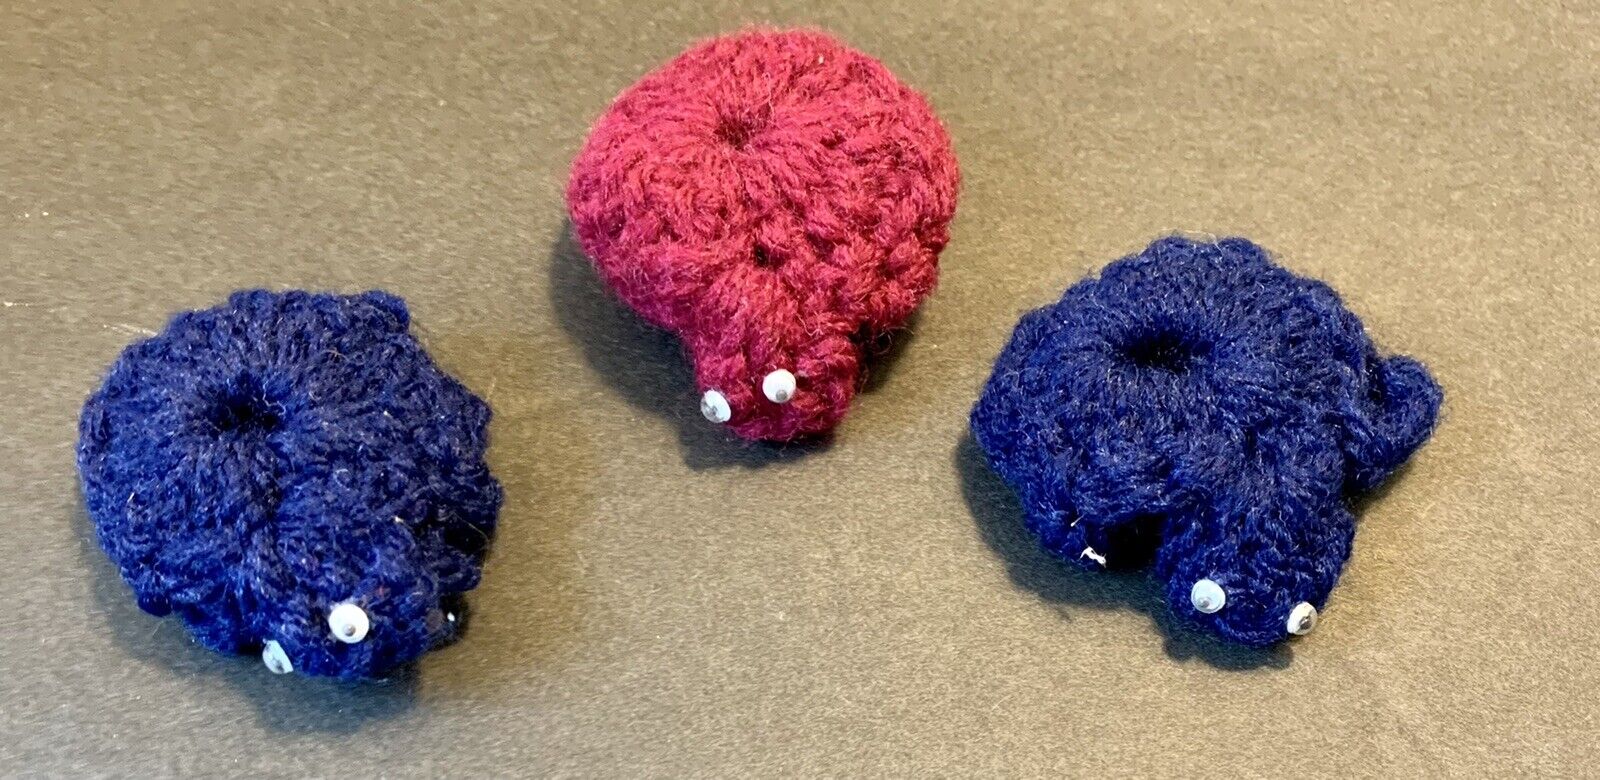 Cute Three (3) Vintage Homemade Crochet Turtles, Navy And Cranberry Colors